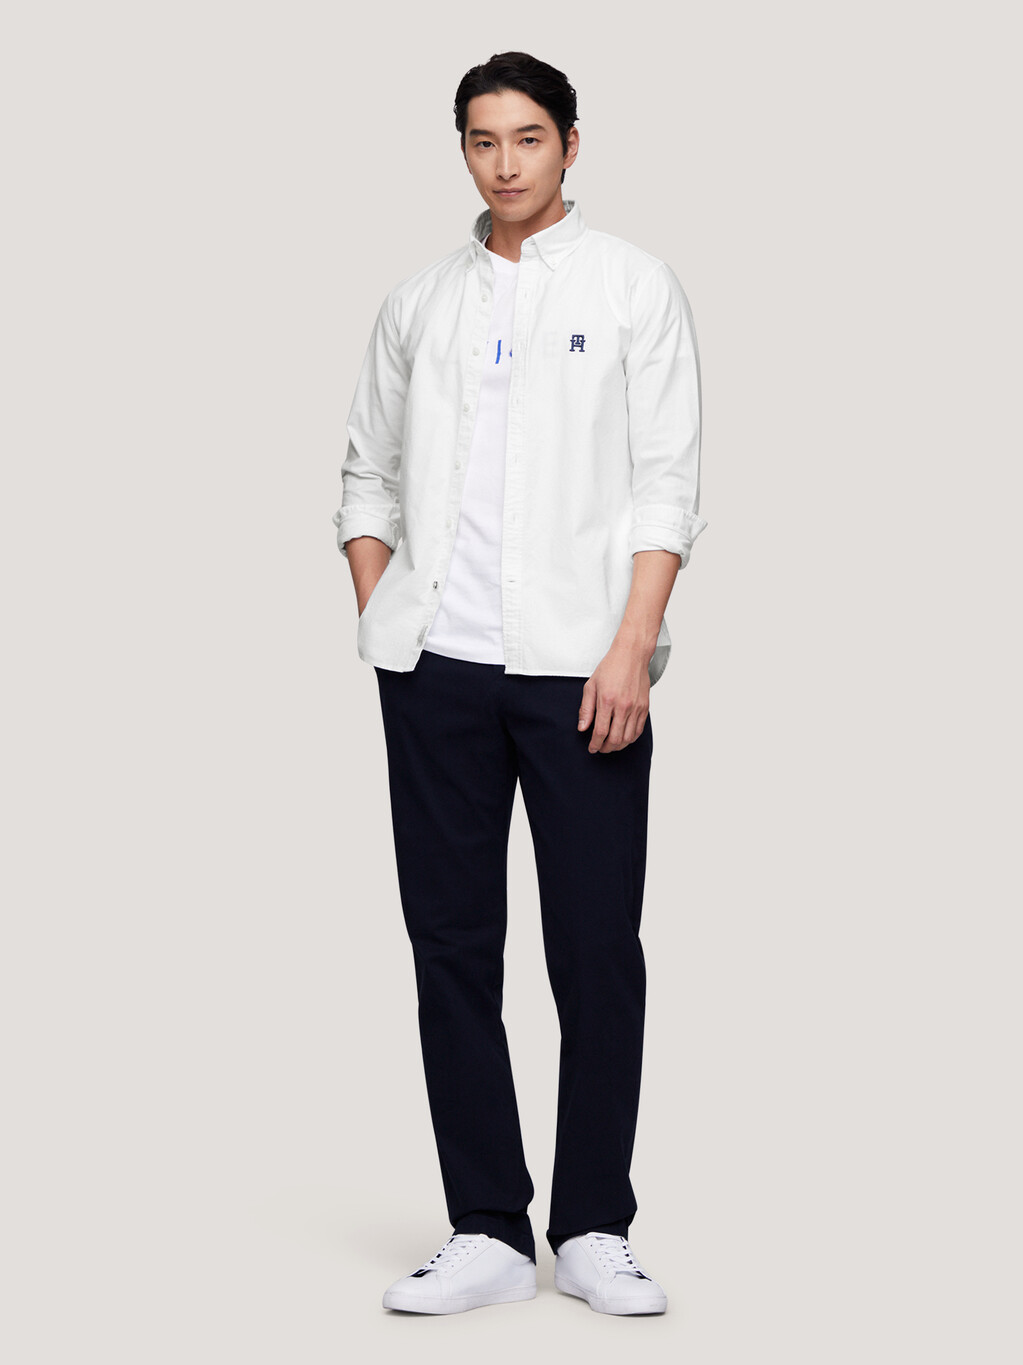 TH Monogram Relaxed Fit Shirt, Optic White, hi-res